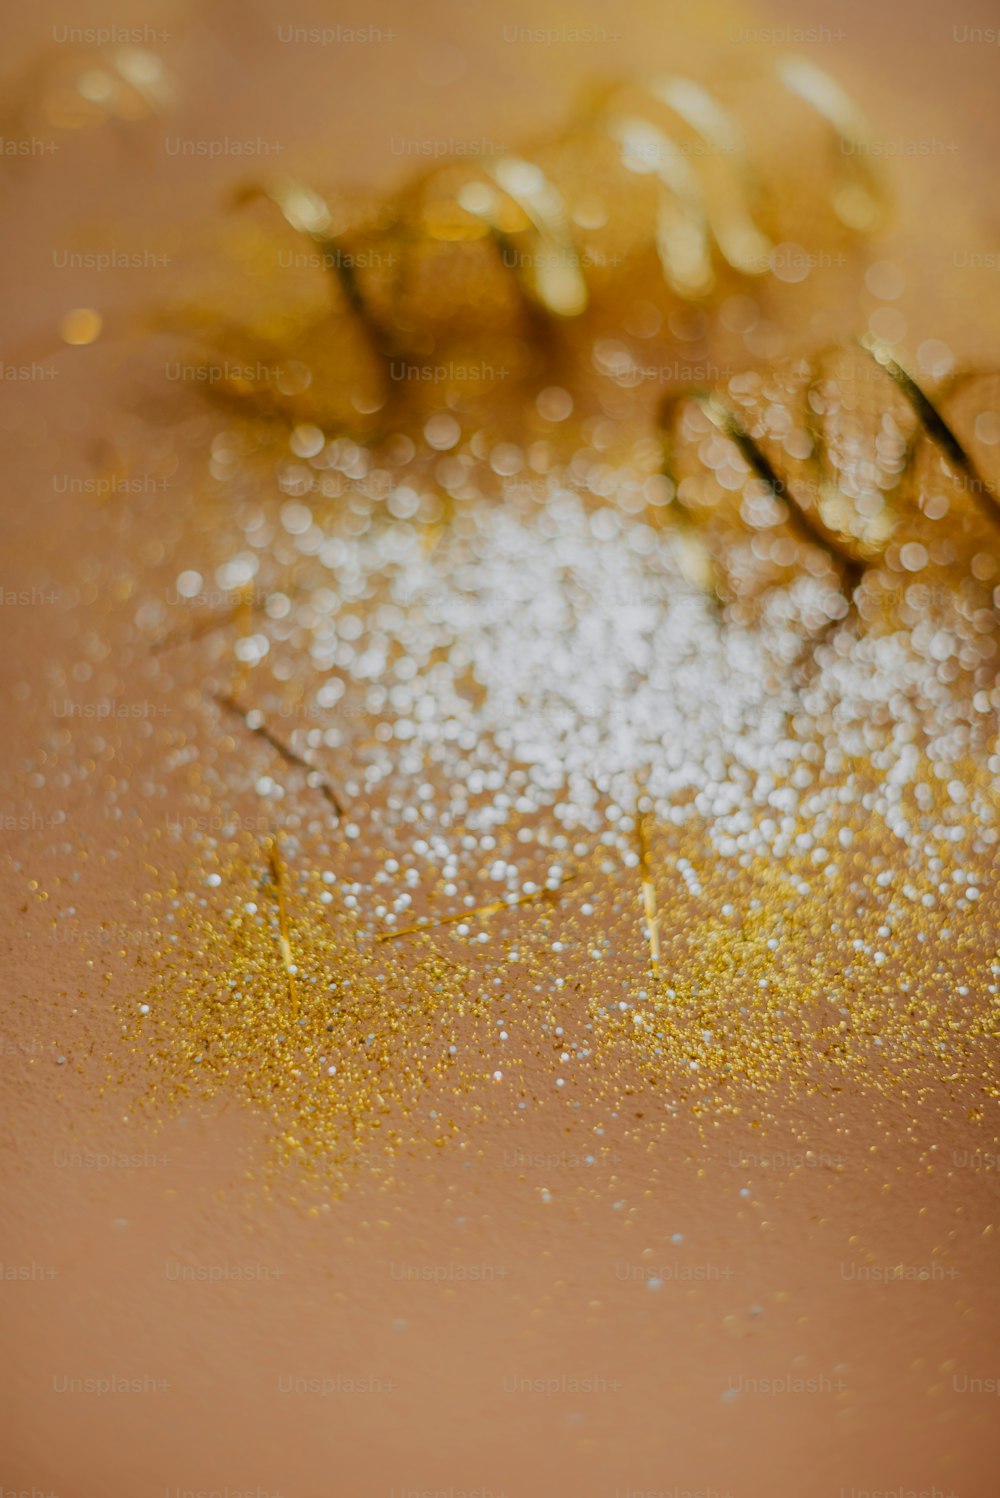 Glitter Texture Pictures  Download Free Images on Unsplash